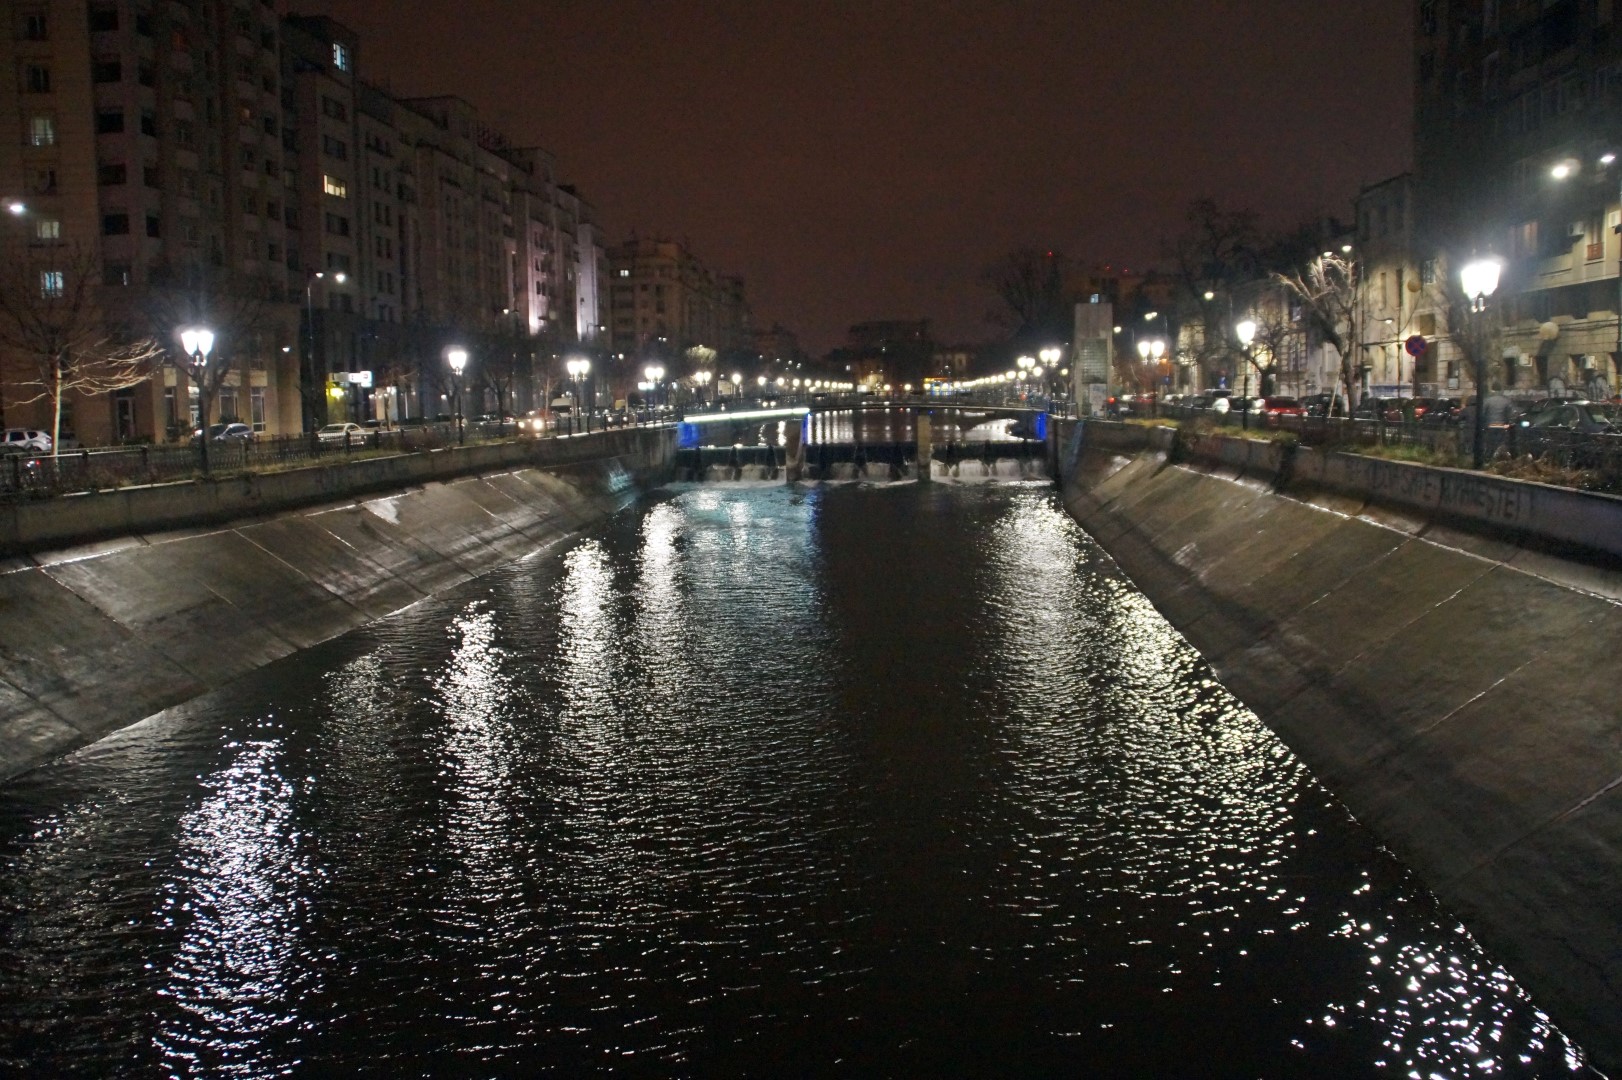 The river Dâmboviţa, which flows through the center of Bucharest